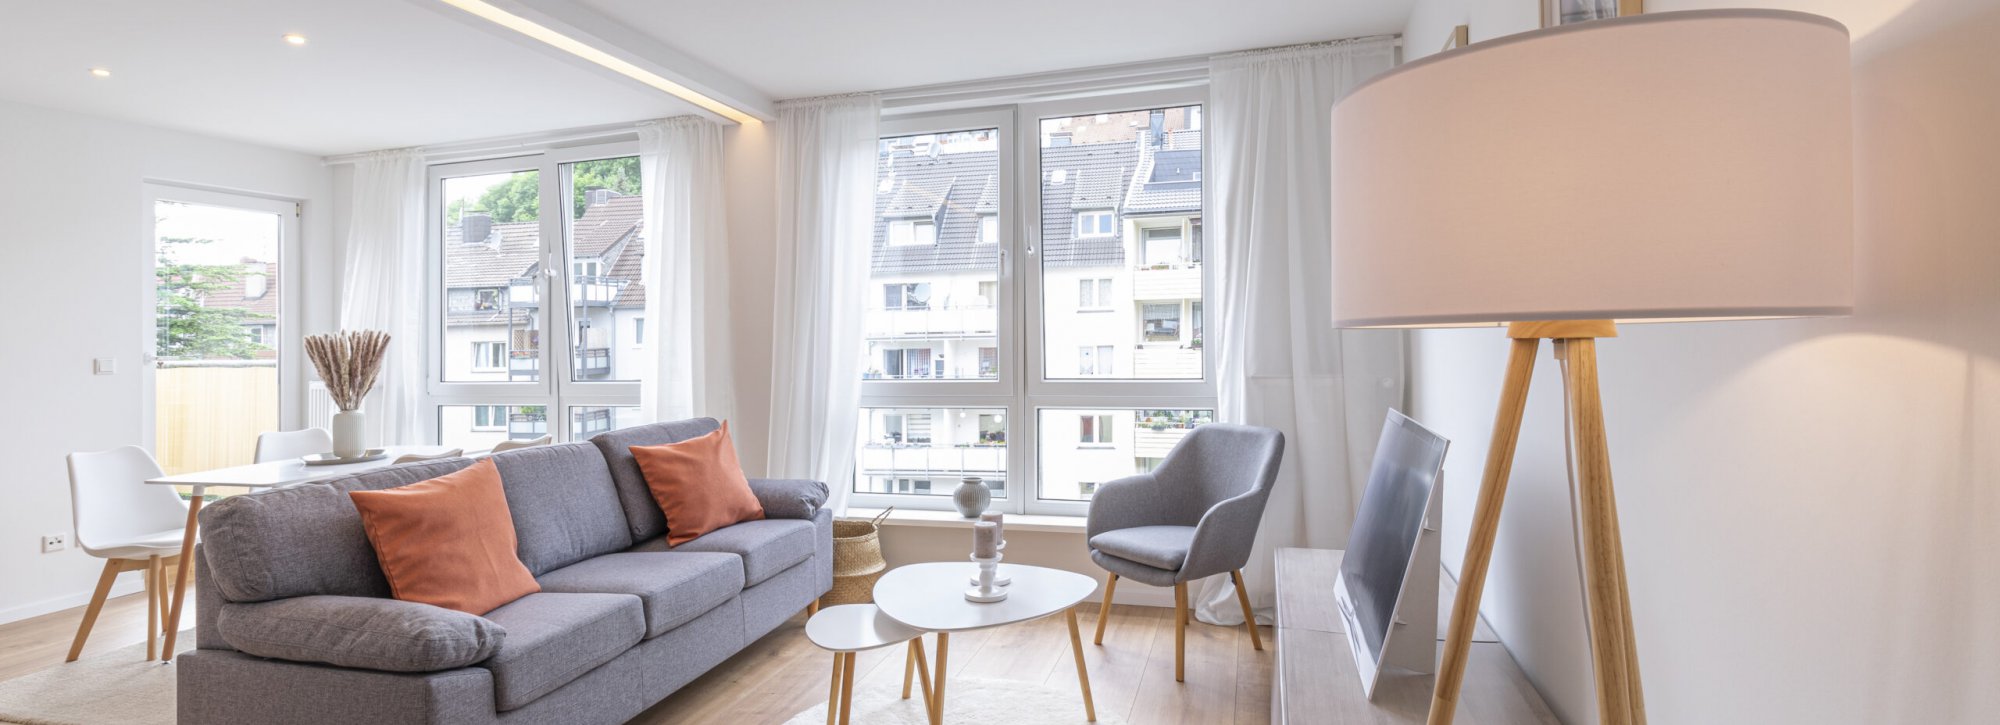 Home Staging - bewohnte Immobilien